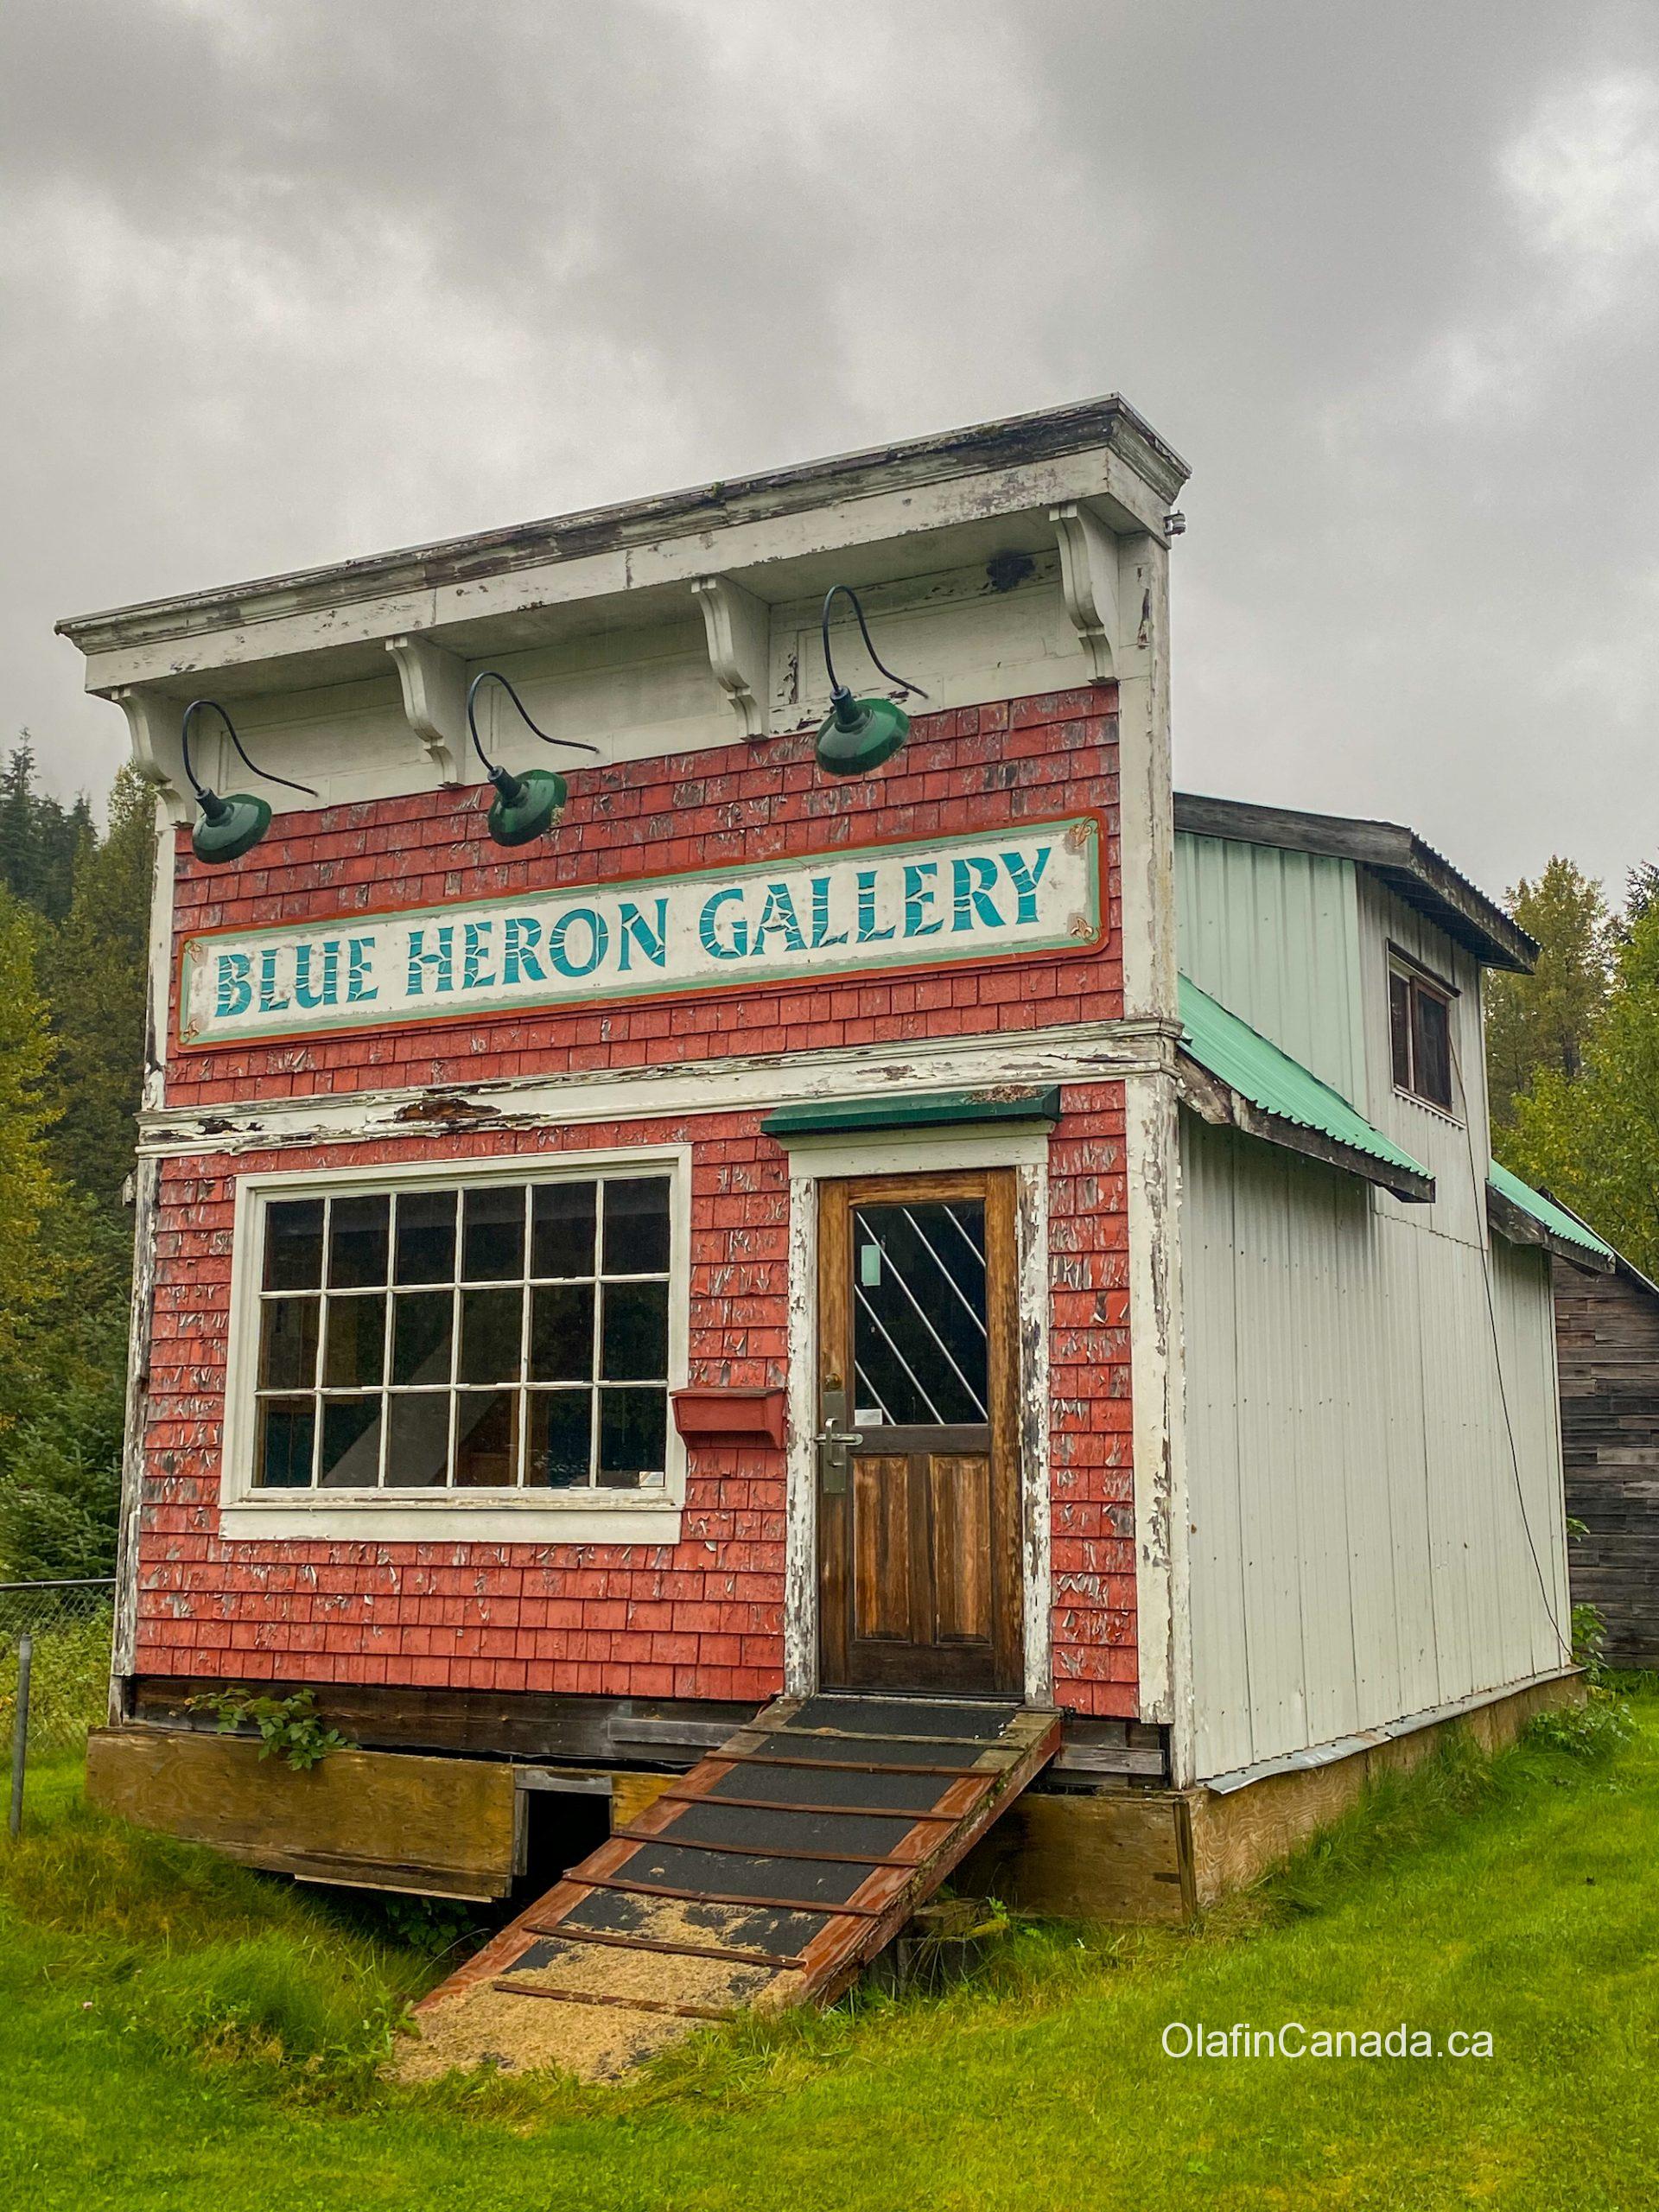 Blue Heron Art Gallery in Alice Arm, moved from Prince Rupert and is now an office for mineral exploration. #olafincanada #britishcolumbia #discoverbc #abandonedbc #alicearm #blueheron